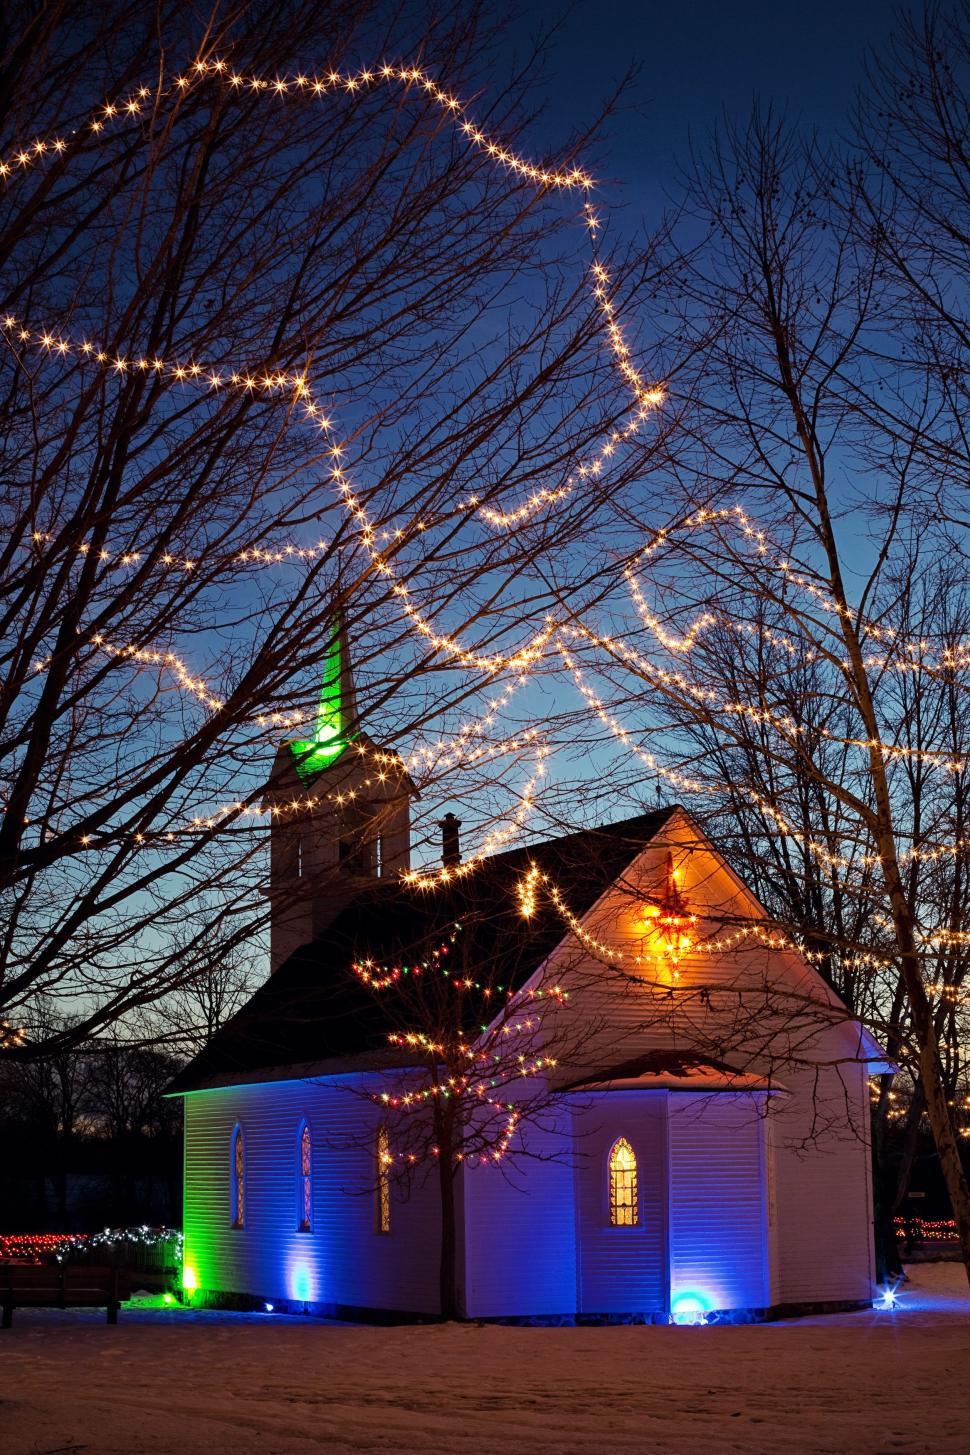 Free Image of Church With Christmas Lights 